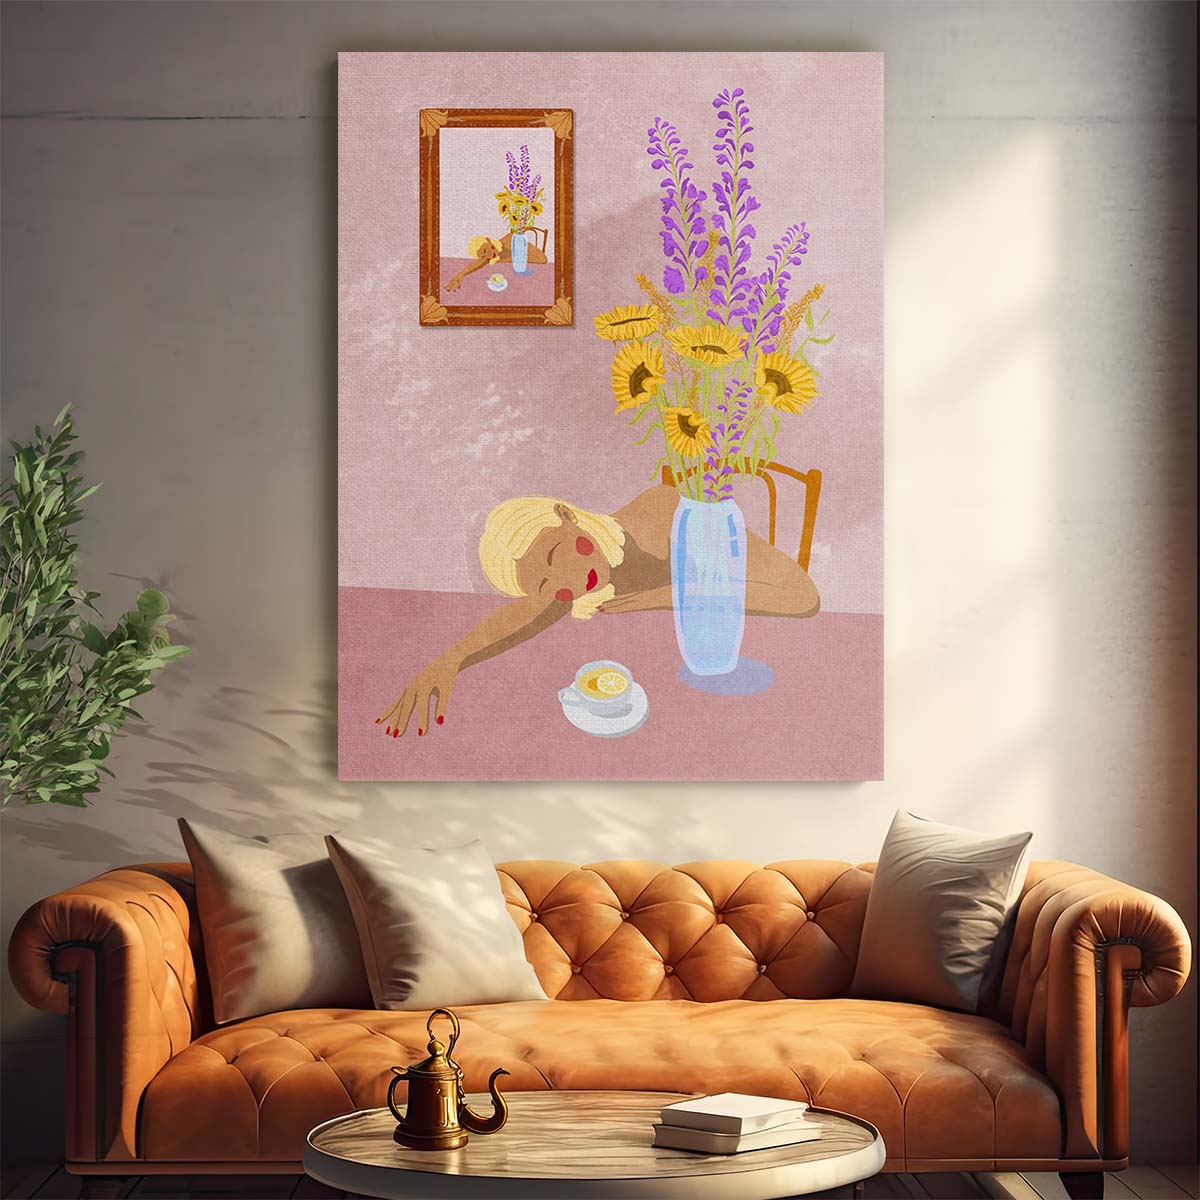 Daydreaming Woman Illustration with Sunflower Vase, Feminine Indoor Art by Luxuriance Designs, made in USA